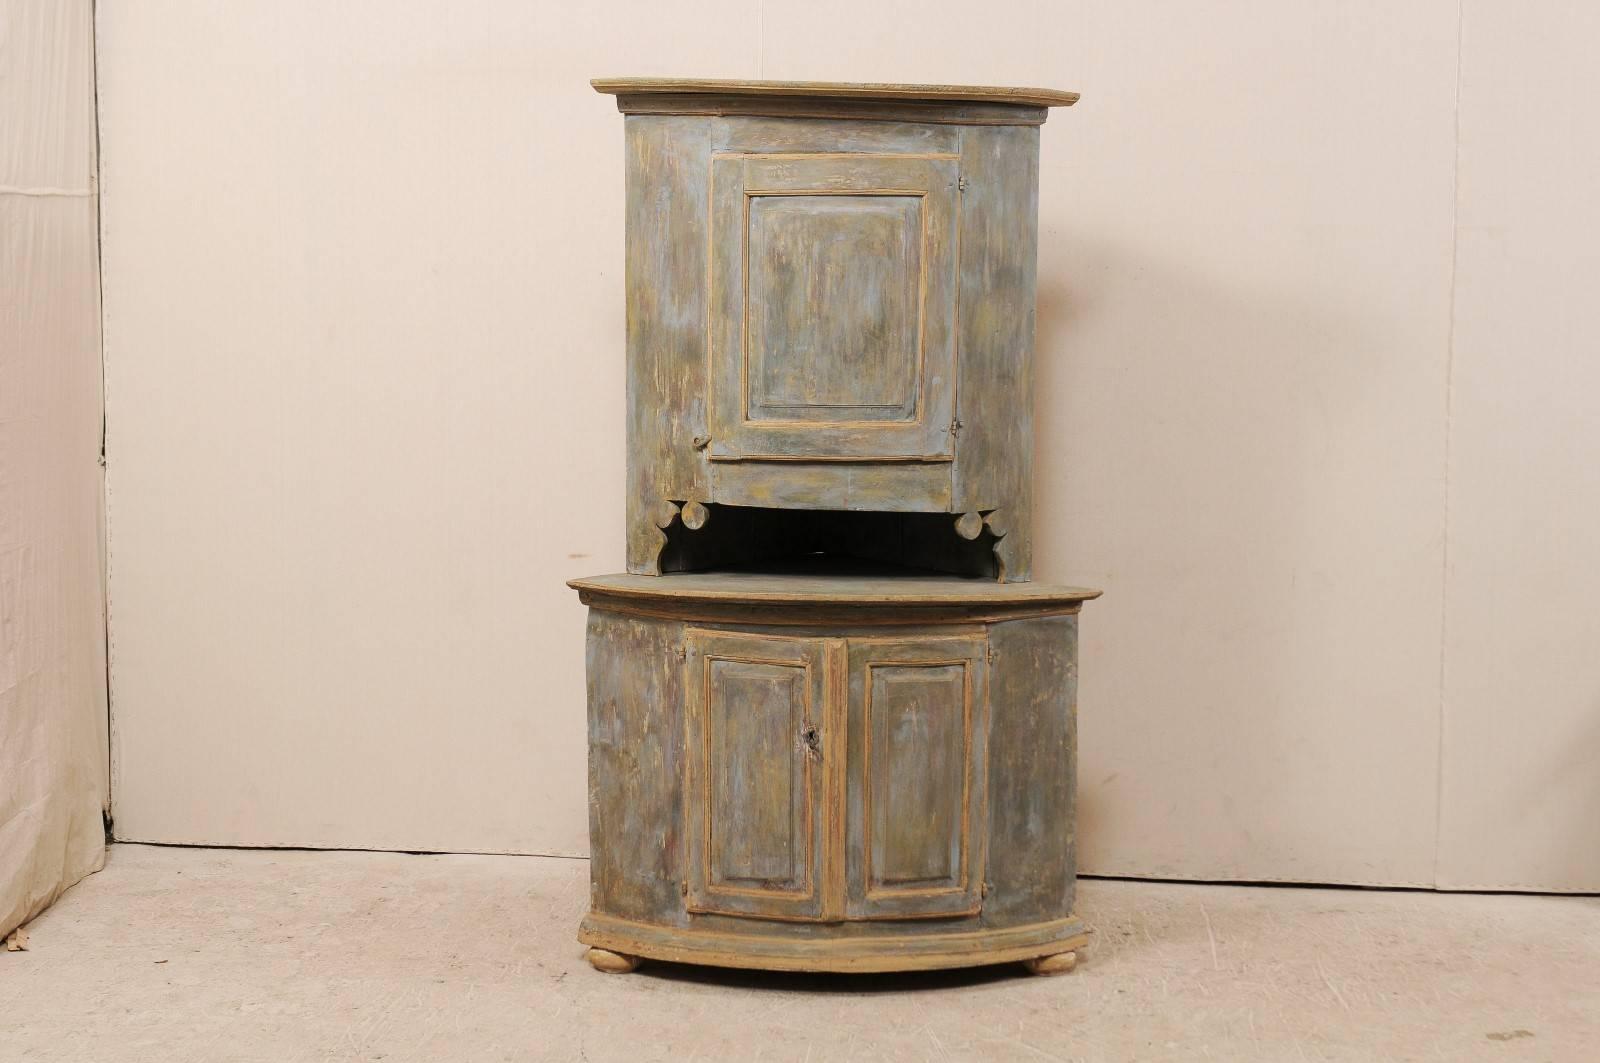 A 19th century Swedish painted wood corner cabinet. This Swedish cabinet, circa 1830-1840, features a single upper door over two lower, with an open section between the two pieces that can be used as a counter height shelf or work space. Both upper